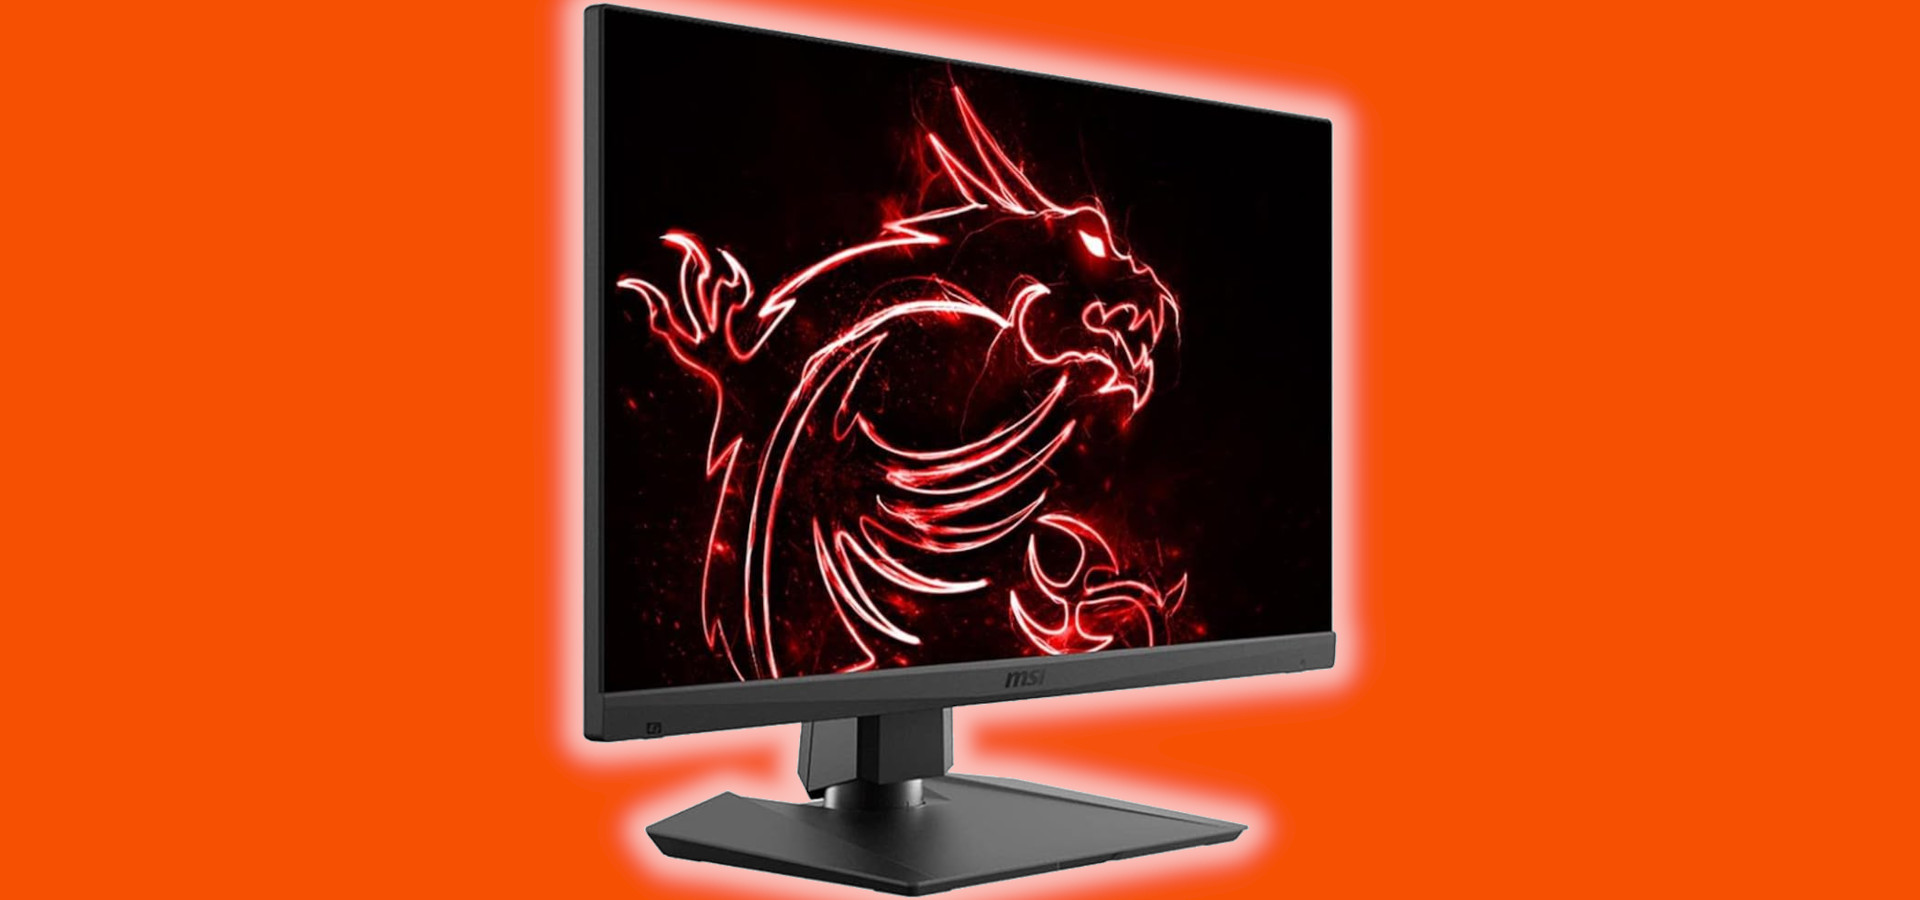 Save $130 on this excellent 1440p gaming monitor from MSI